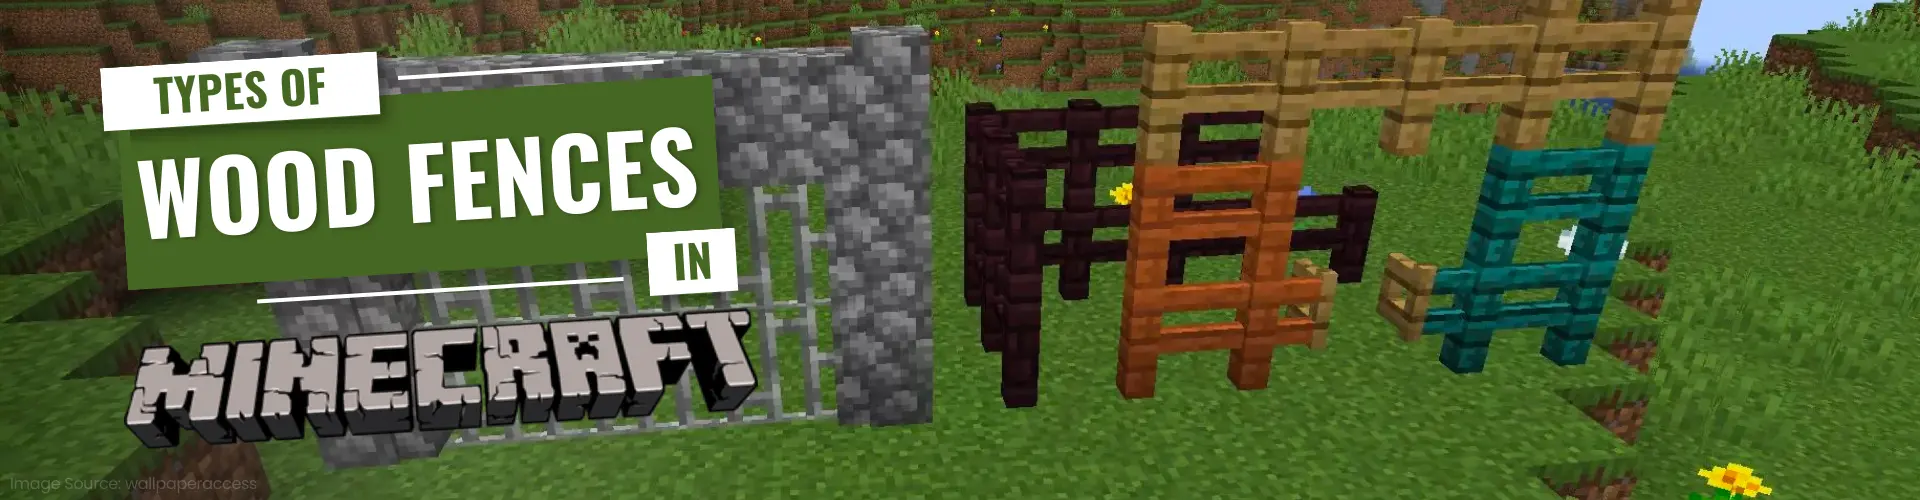 types of wood fences in minecraft